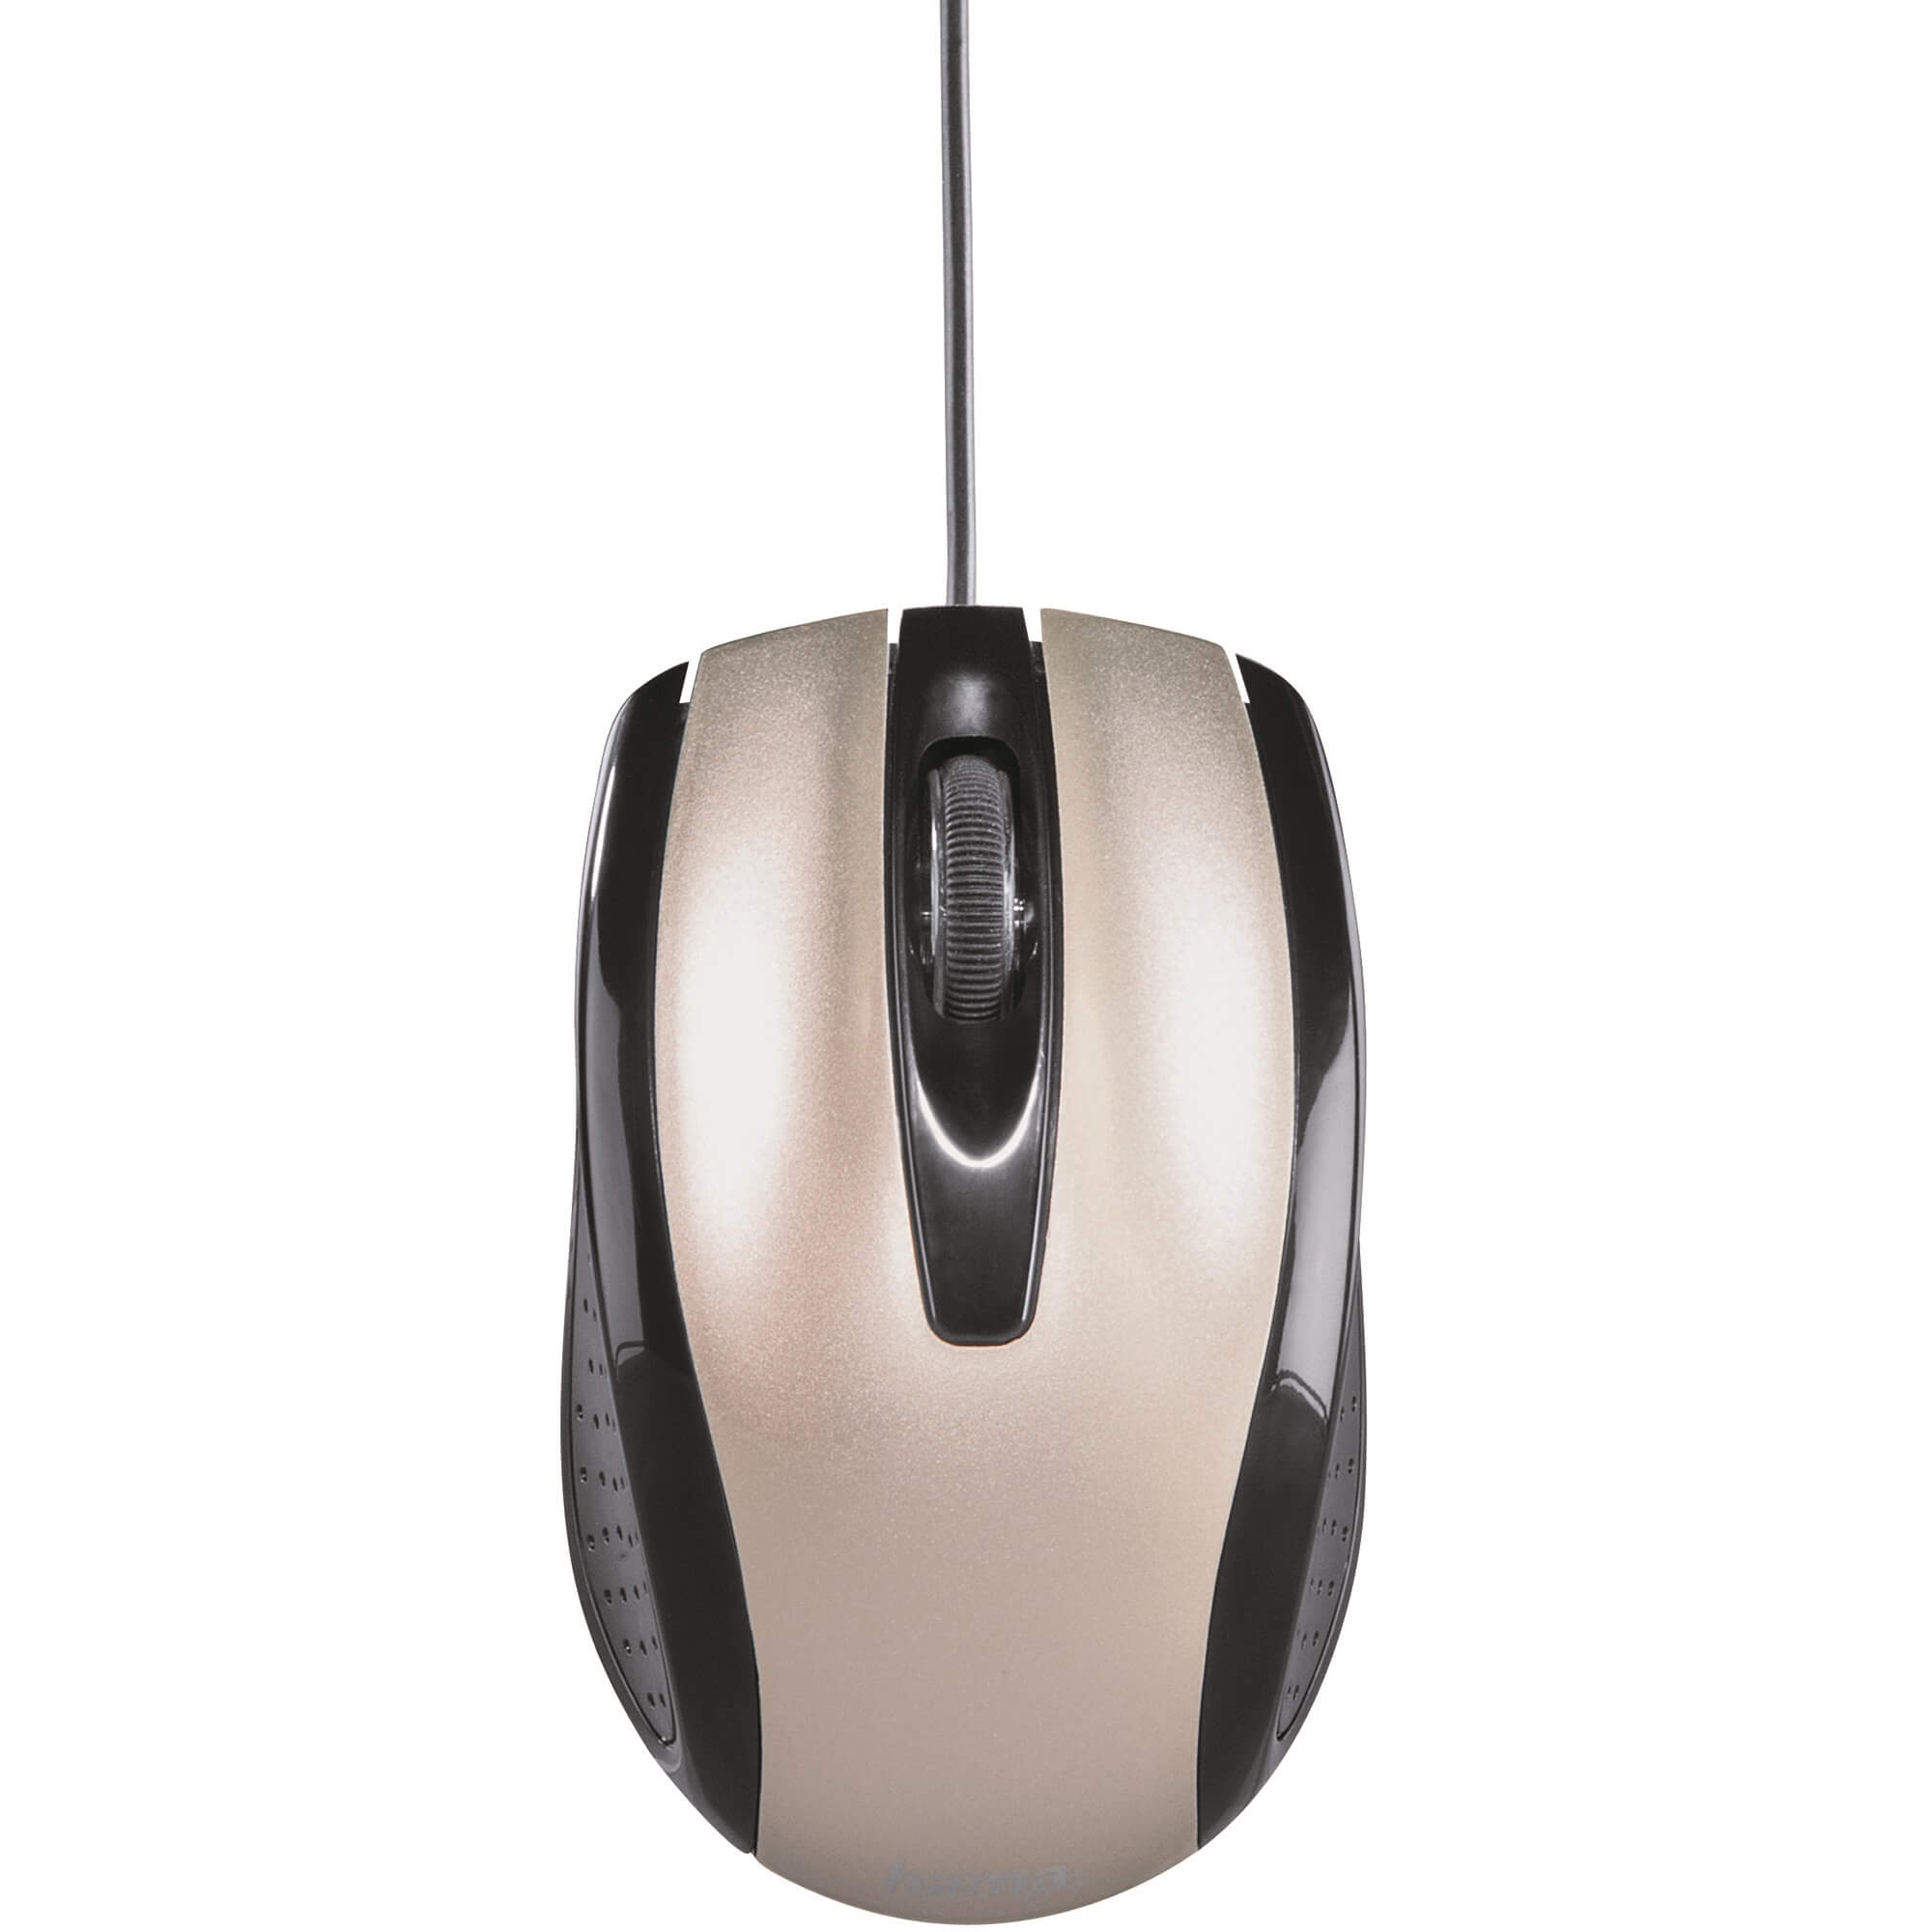  Mouse USB wired Hama AM-5400 Bej 